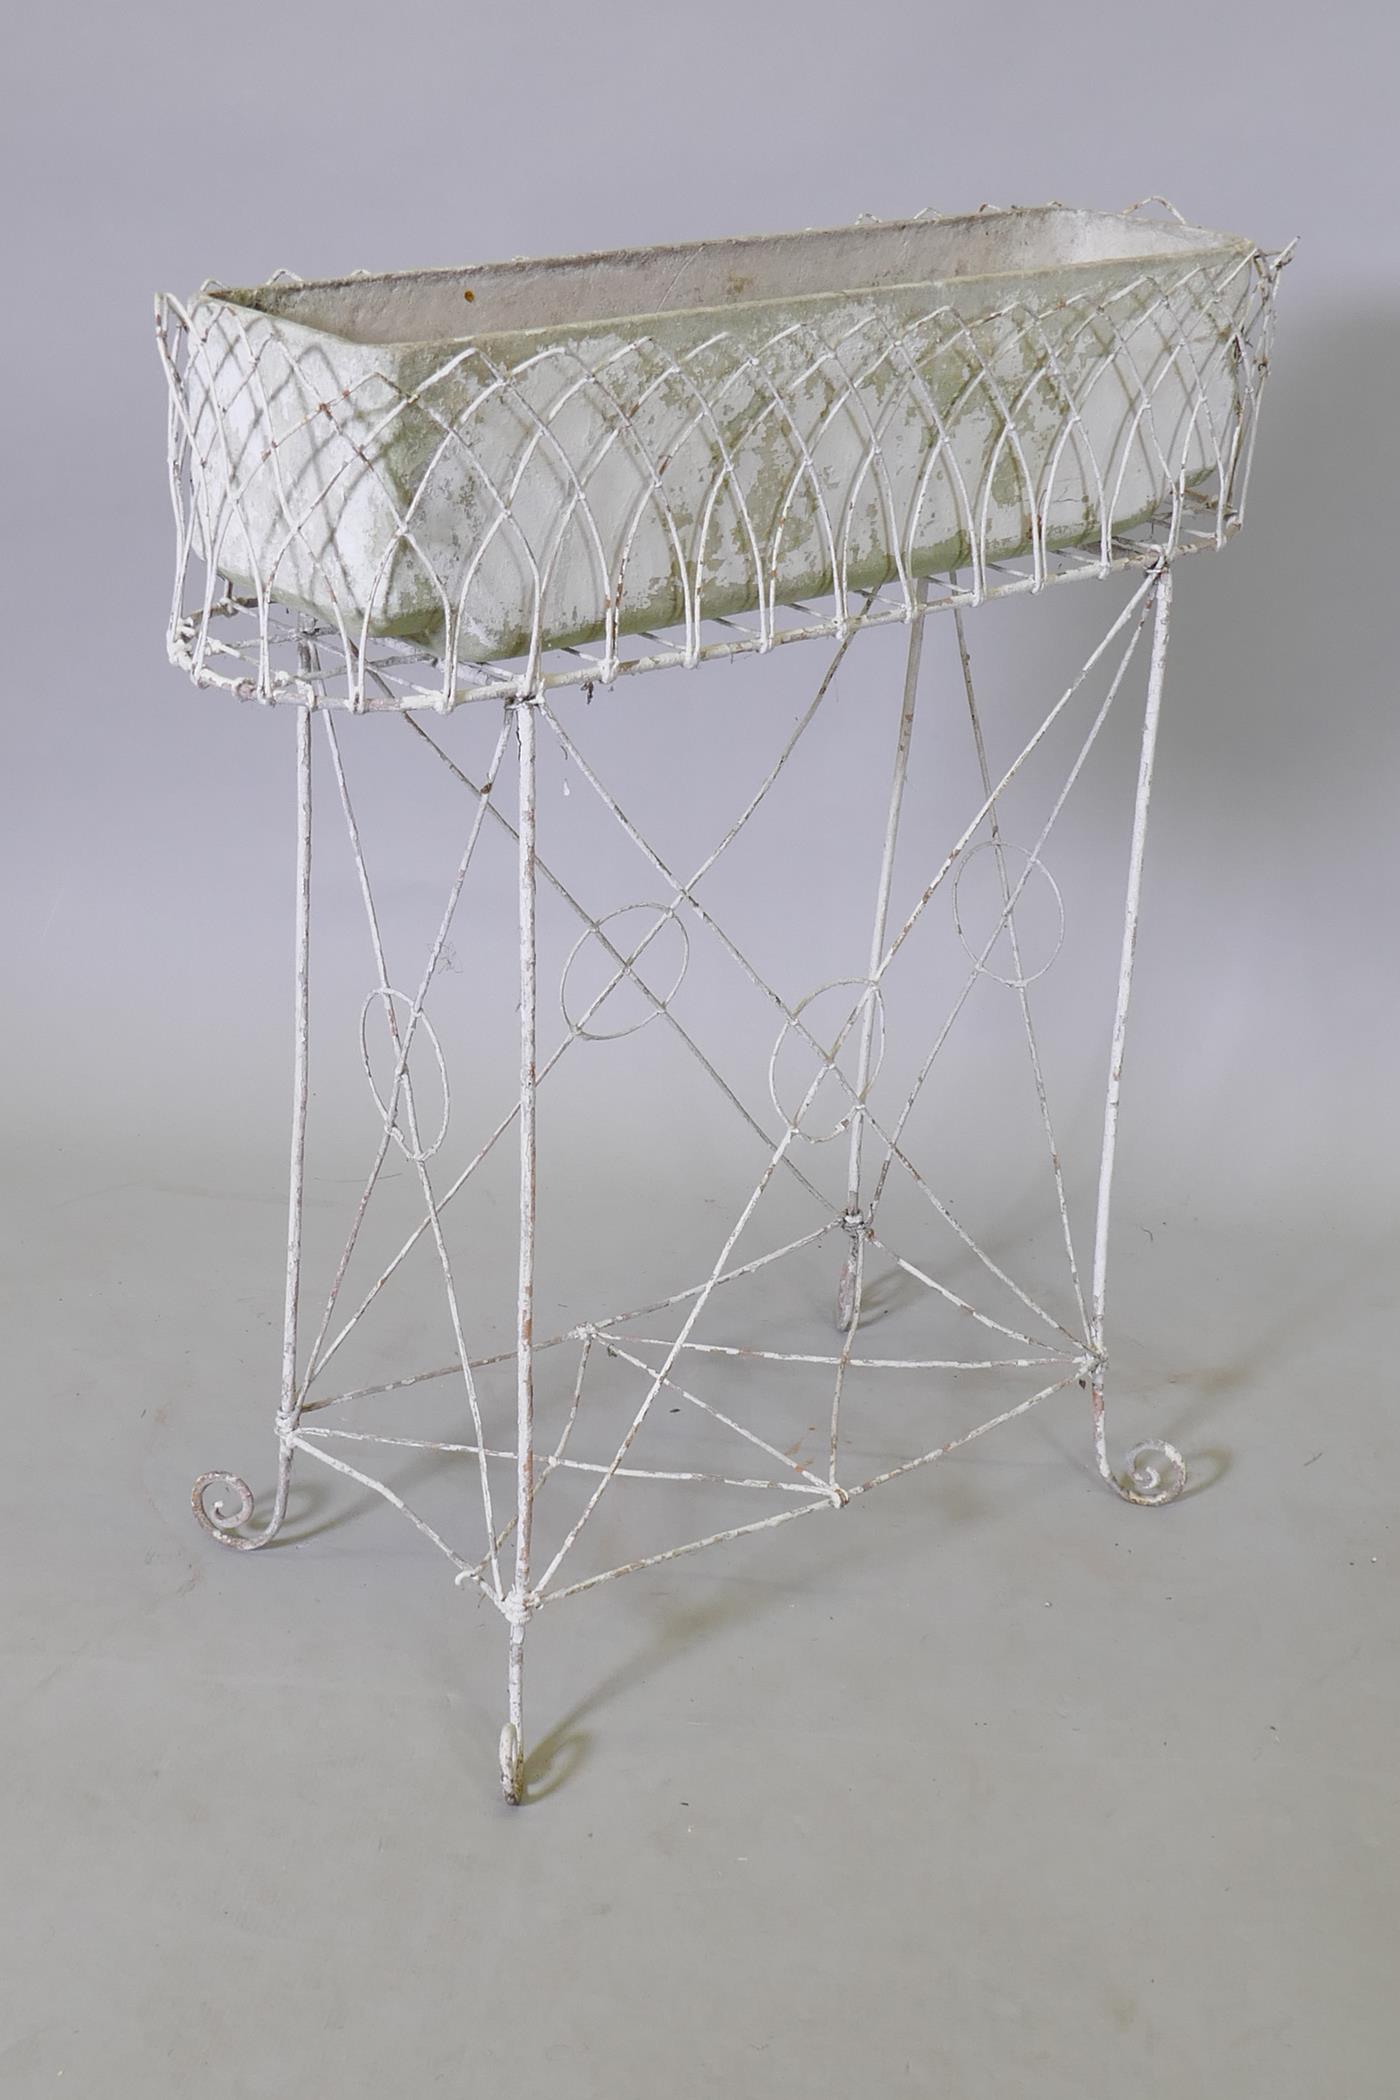 A C19th painted wire garden trough stand, 70 x 77cms - Image 2 of 3